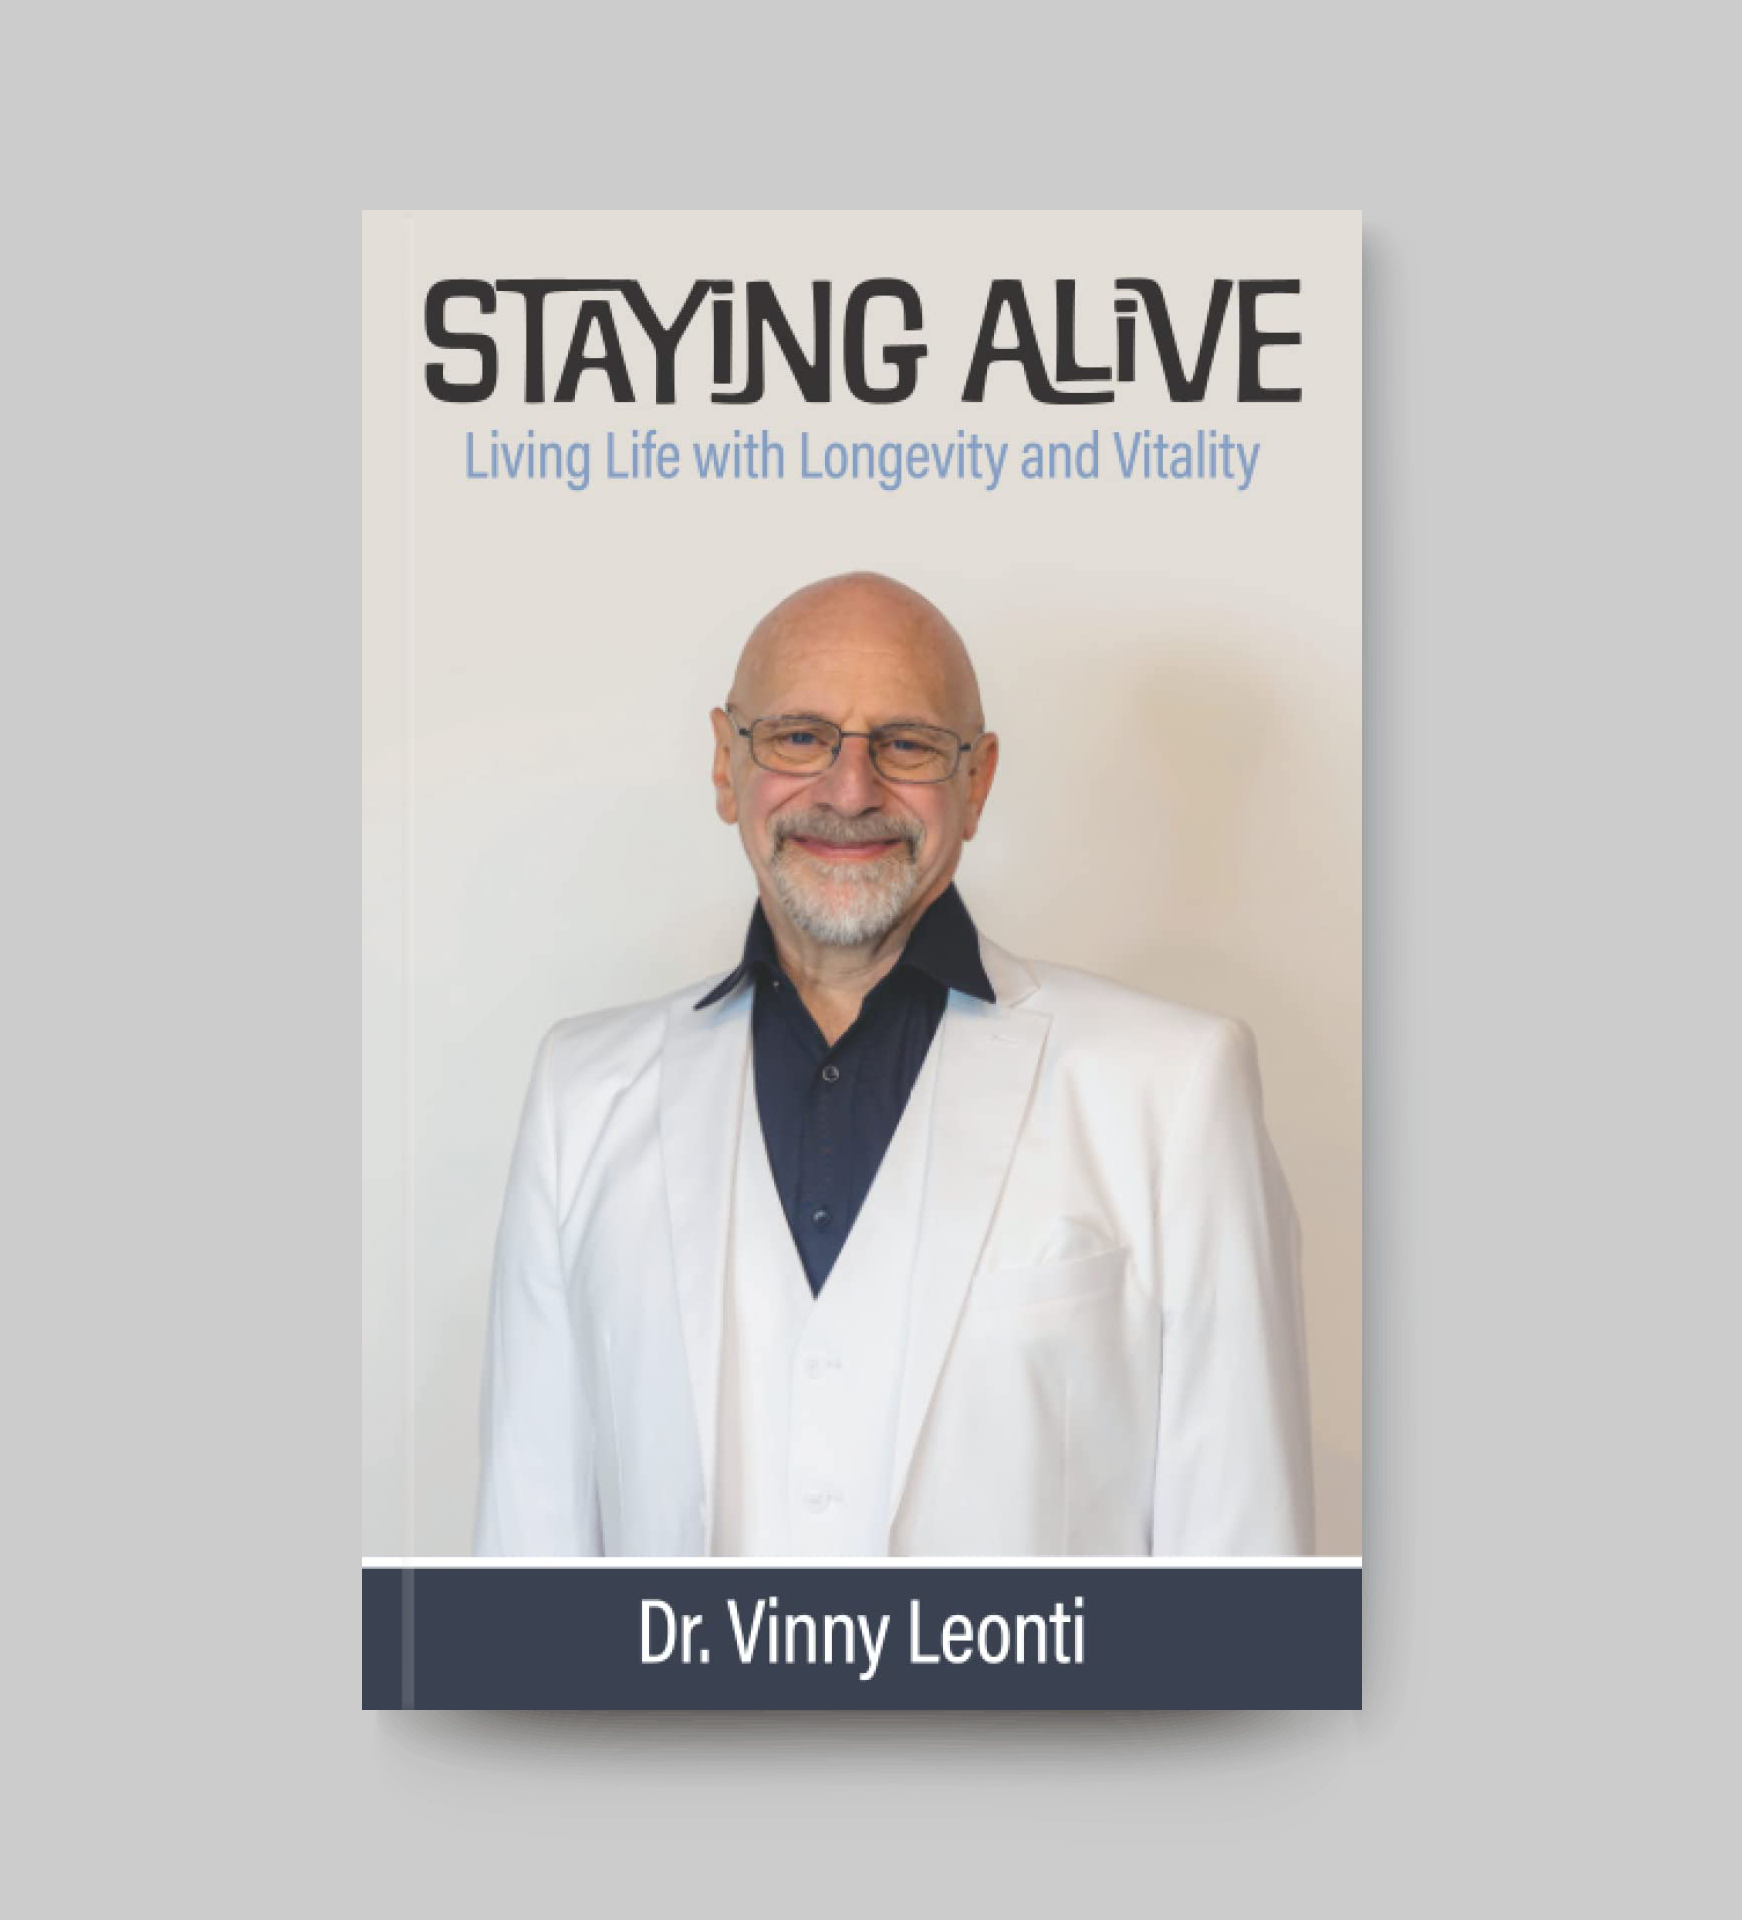 staying-alive-book-cover-mockup-1